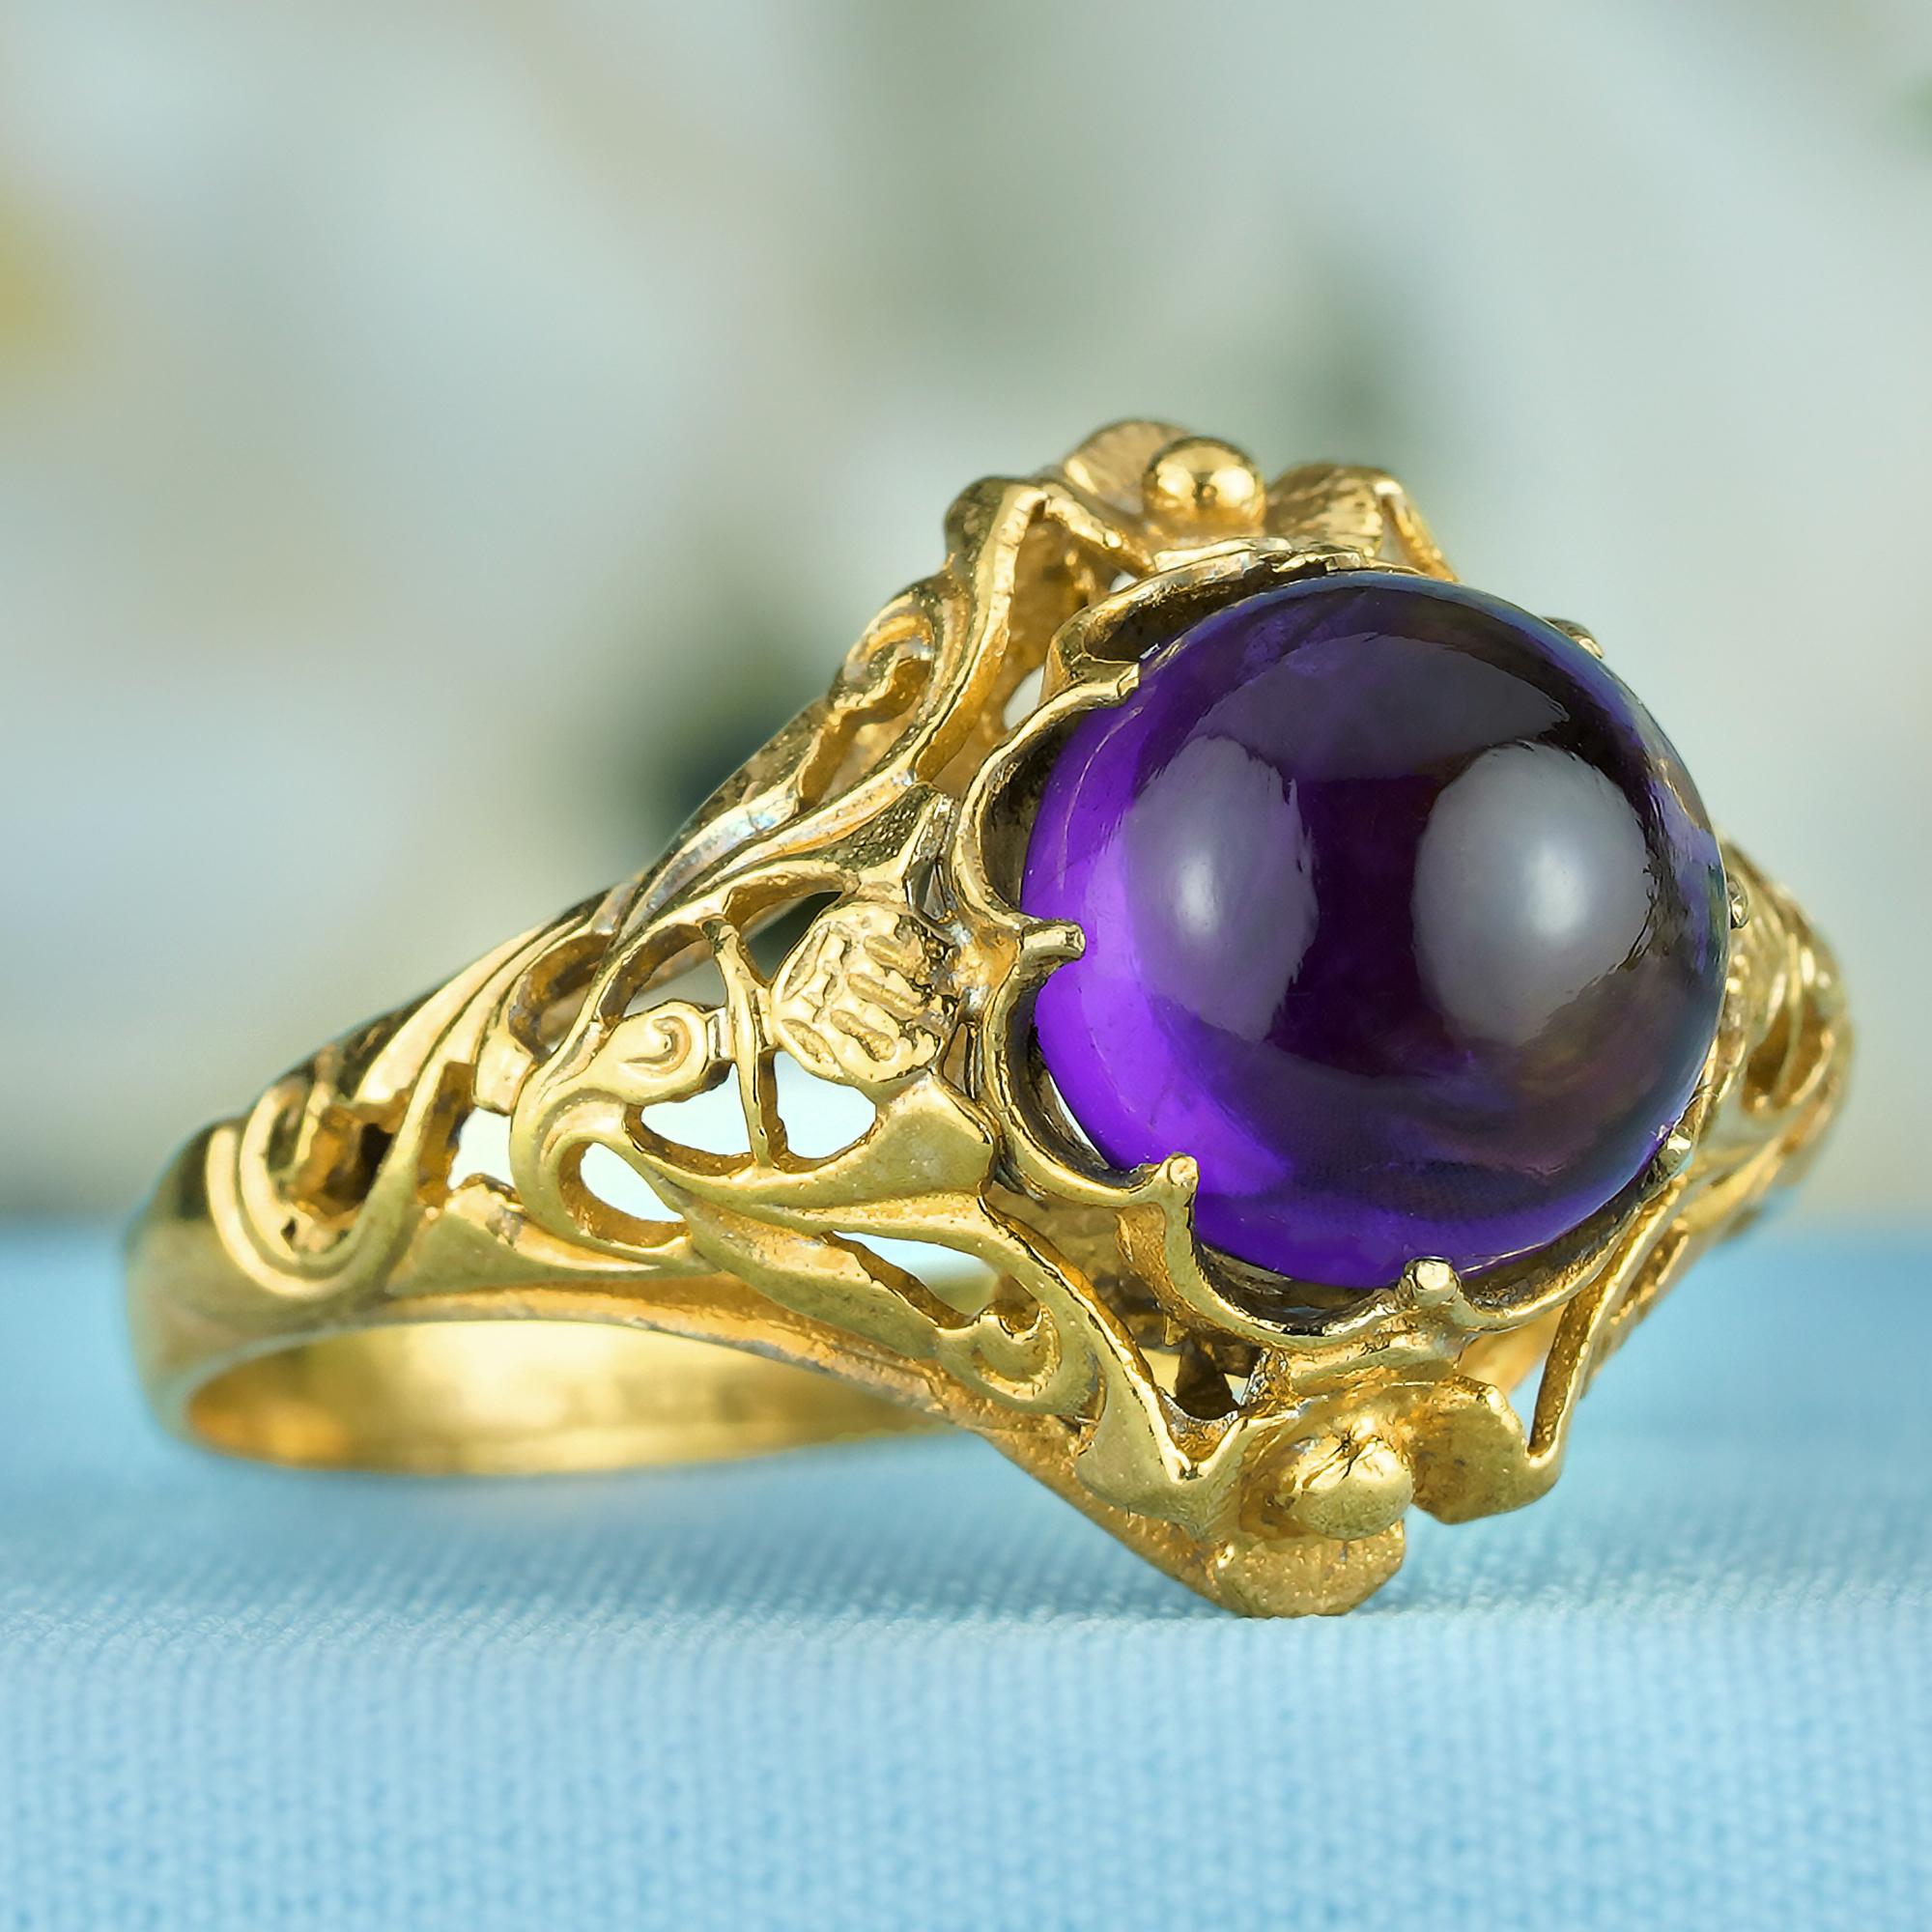 For Sale:  Natural Cabochon Amethyst Vintage Style Filigree Ring in Solid 9K Yellow Gold 2